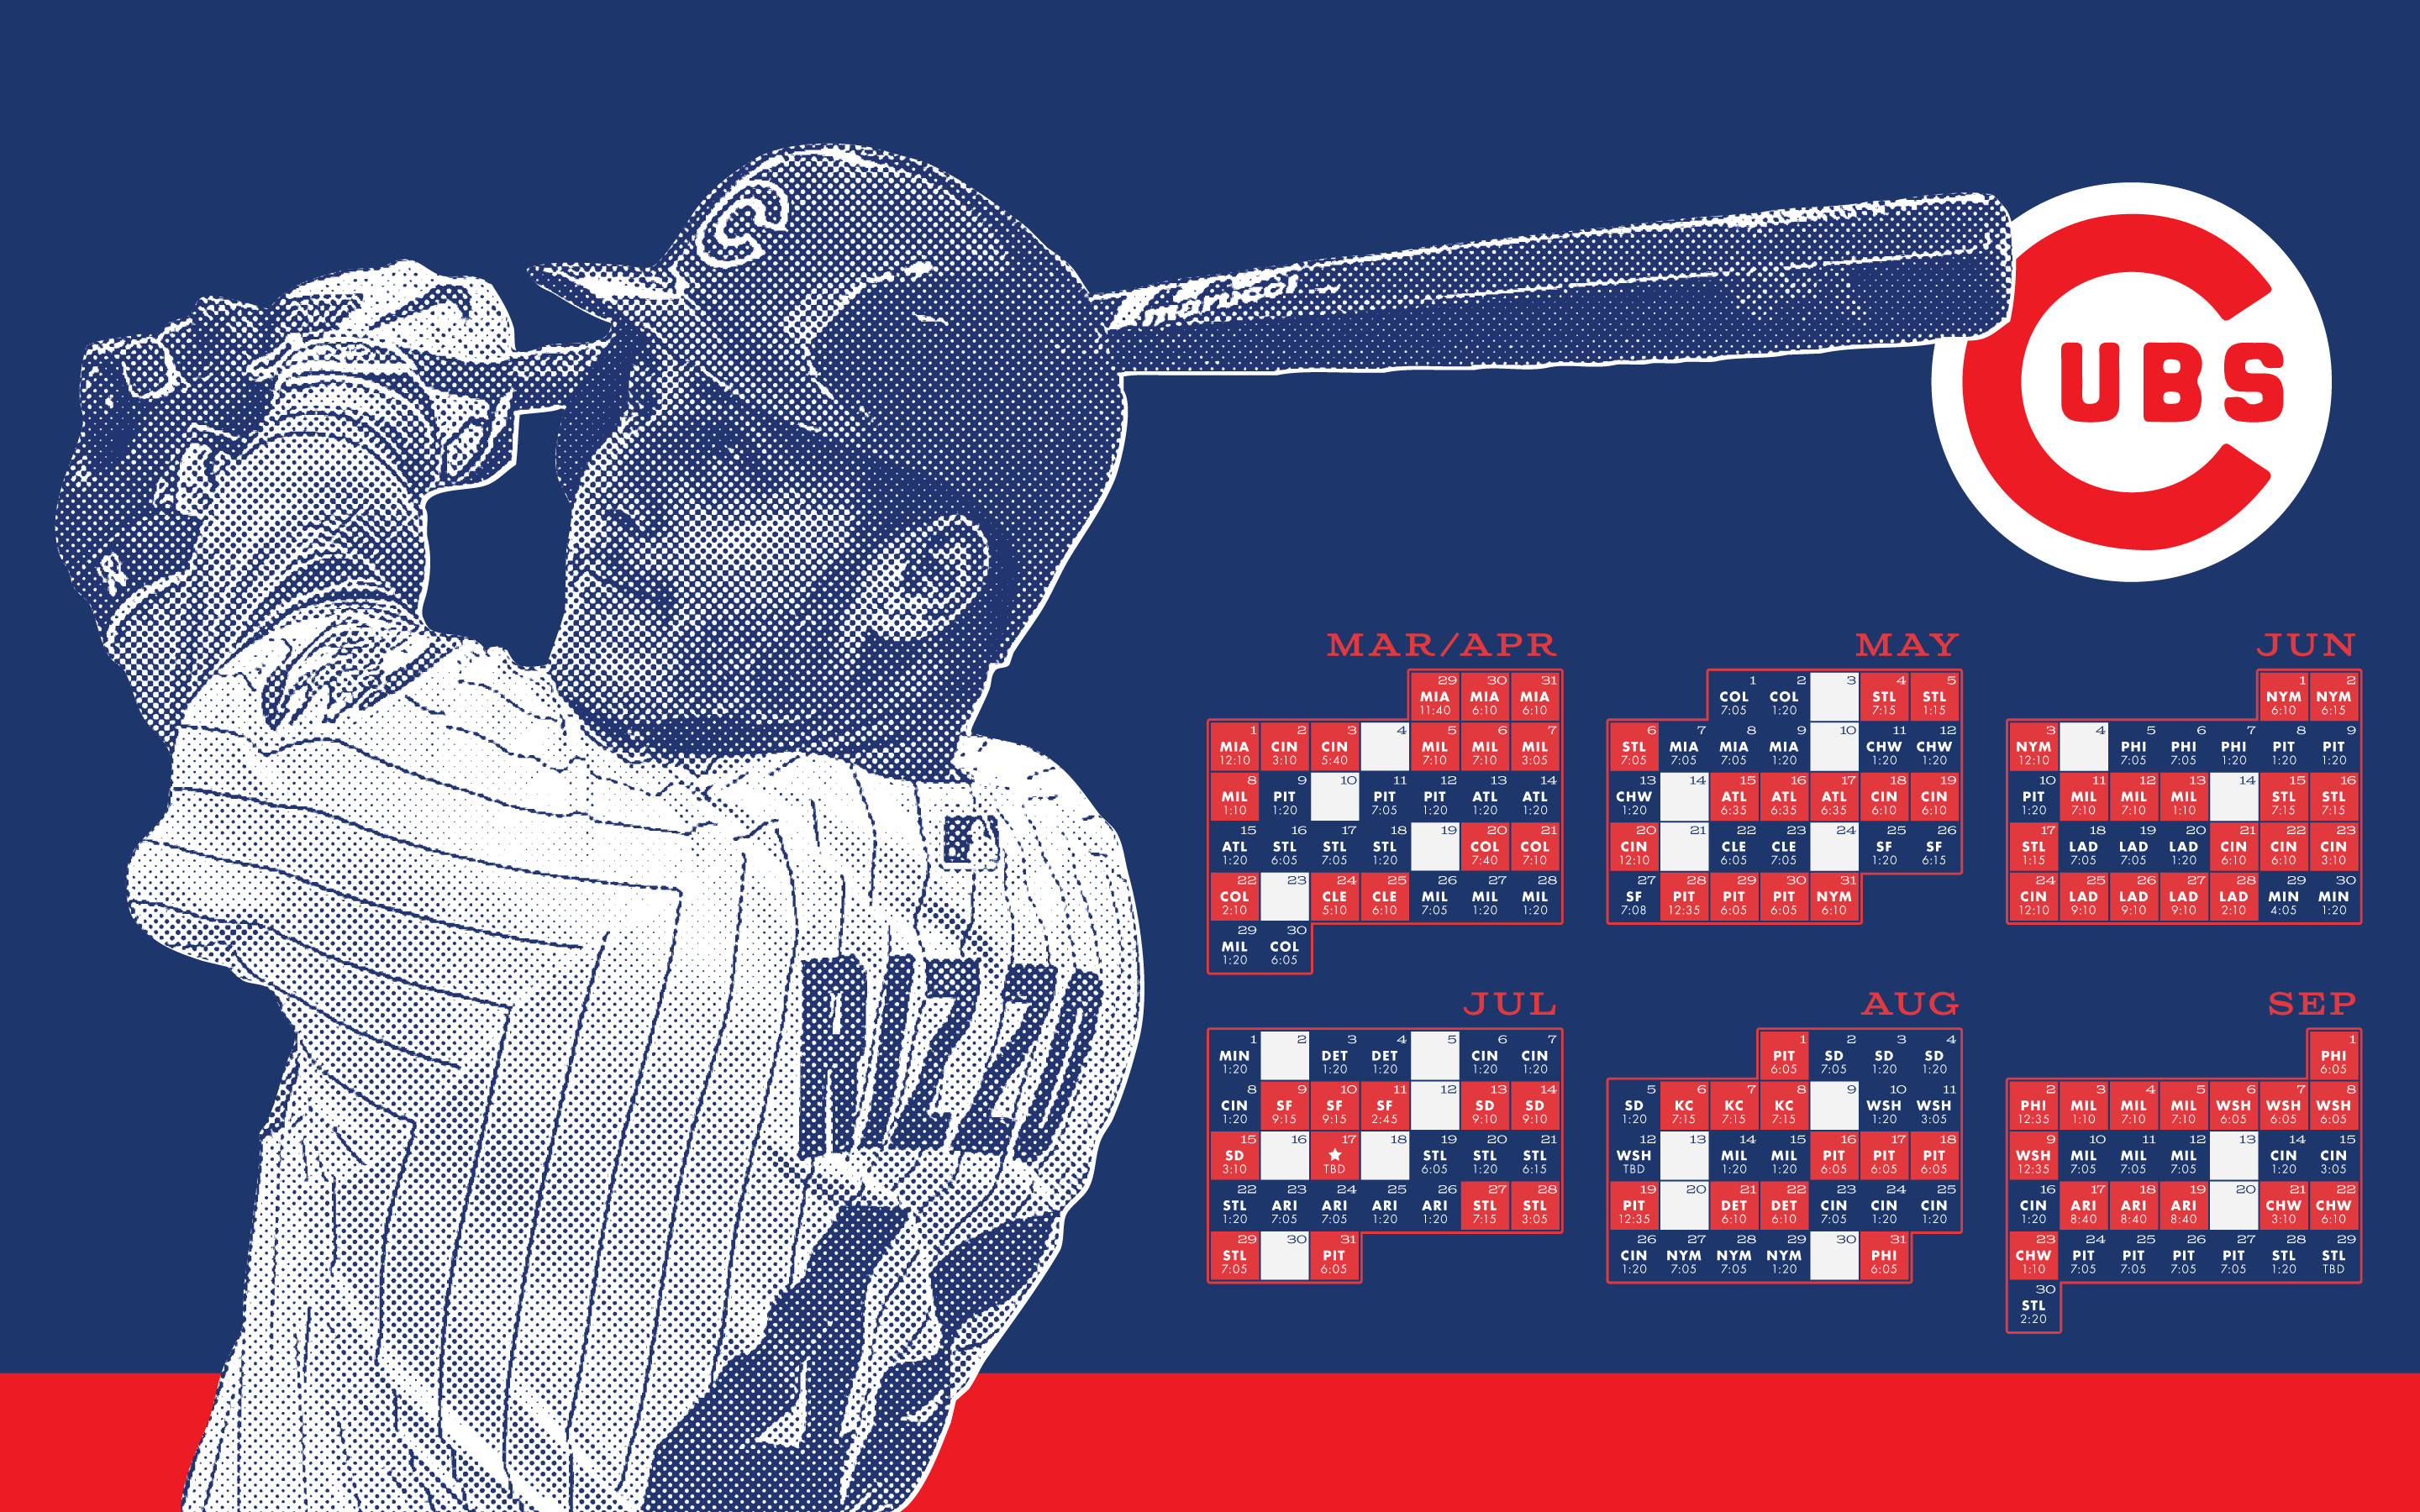 2880x1800 By Popular Request: Cubs Schedule Wallpaper ...